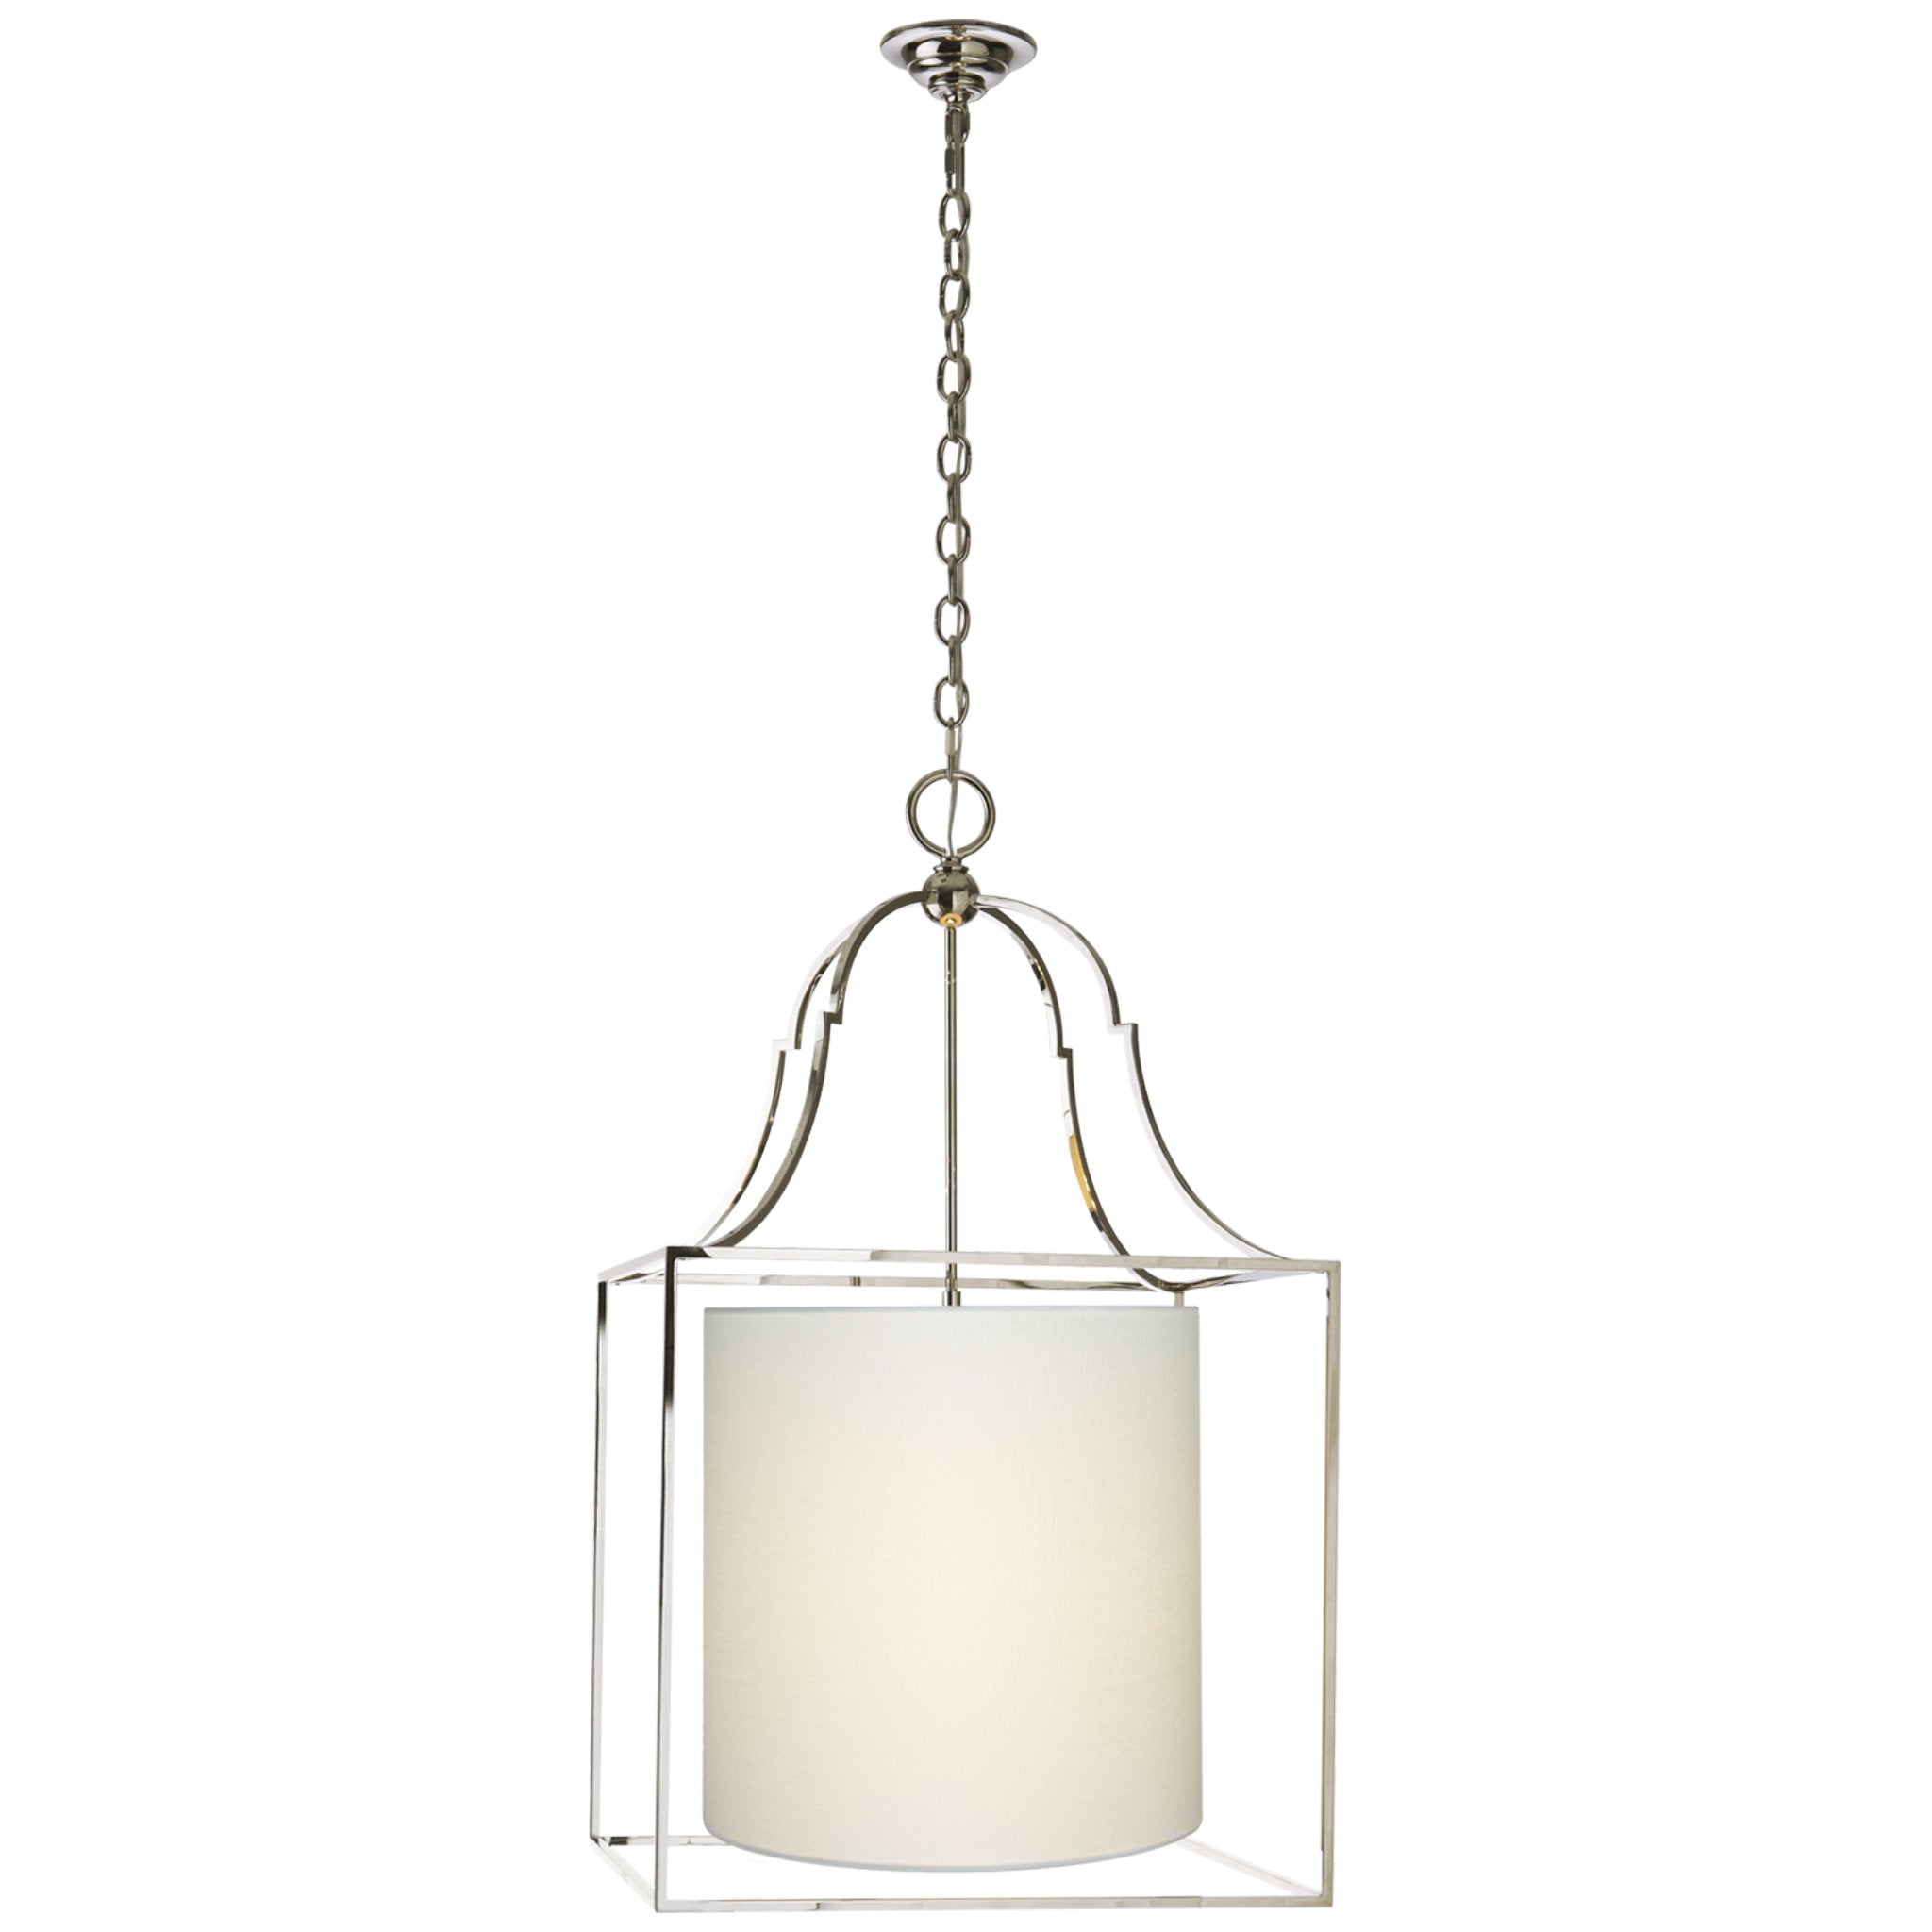 Chapman & Myers Gustavian Lantern in Polished Nickel with Linen Shade